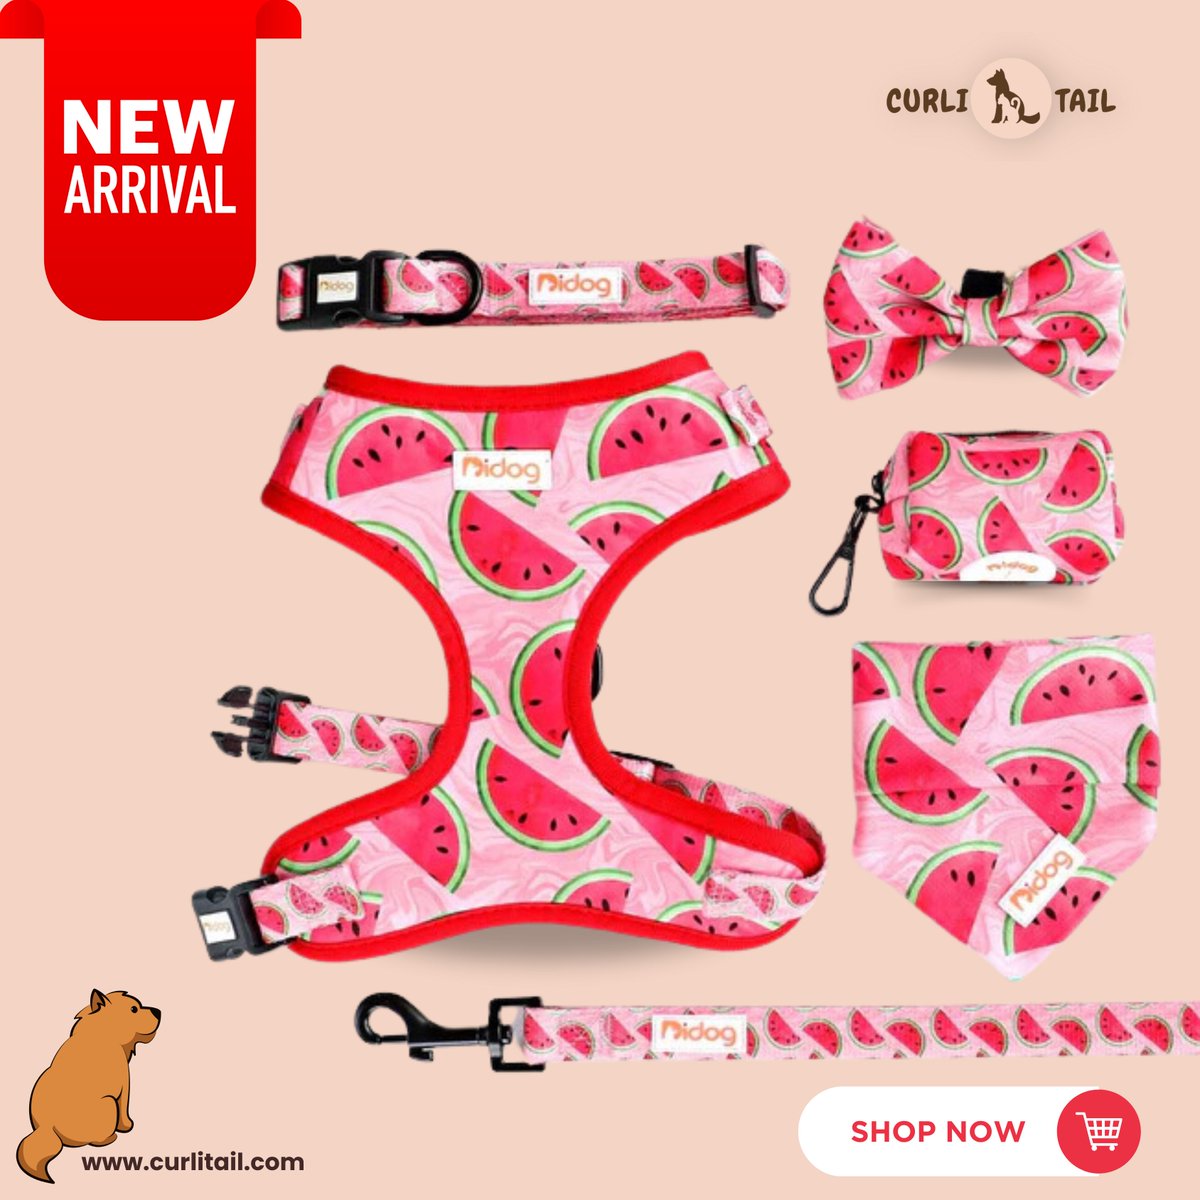 🍉🐾 Summer fun with our adorable Watermelon Print Set! 🍉🐾
 
Harness
Leash
Bow Collar
Poo bag
Bandana
 Get your paws on this sweet set at curlitail.com/collections/ch…! 
 #WatermelonPrint #SummerStyle #PetEssentials #WalksWithPets
#PetFashion #designercollars #personalizedpet